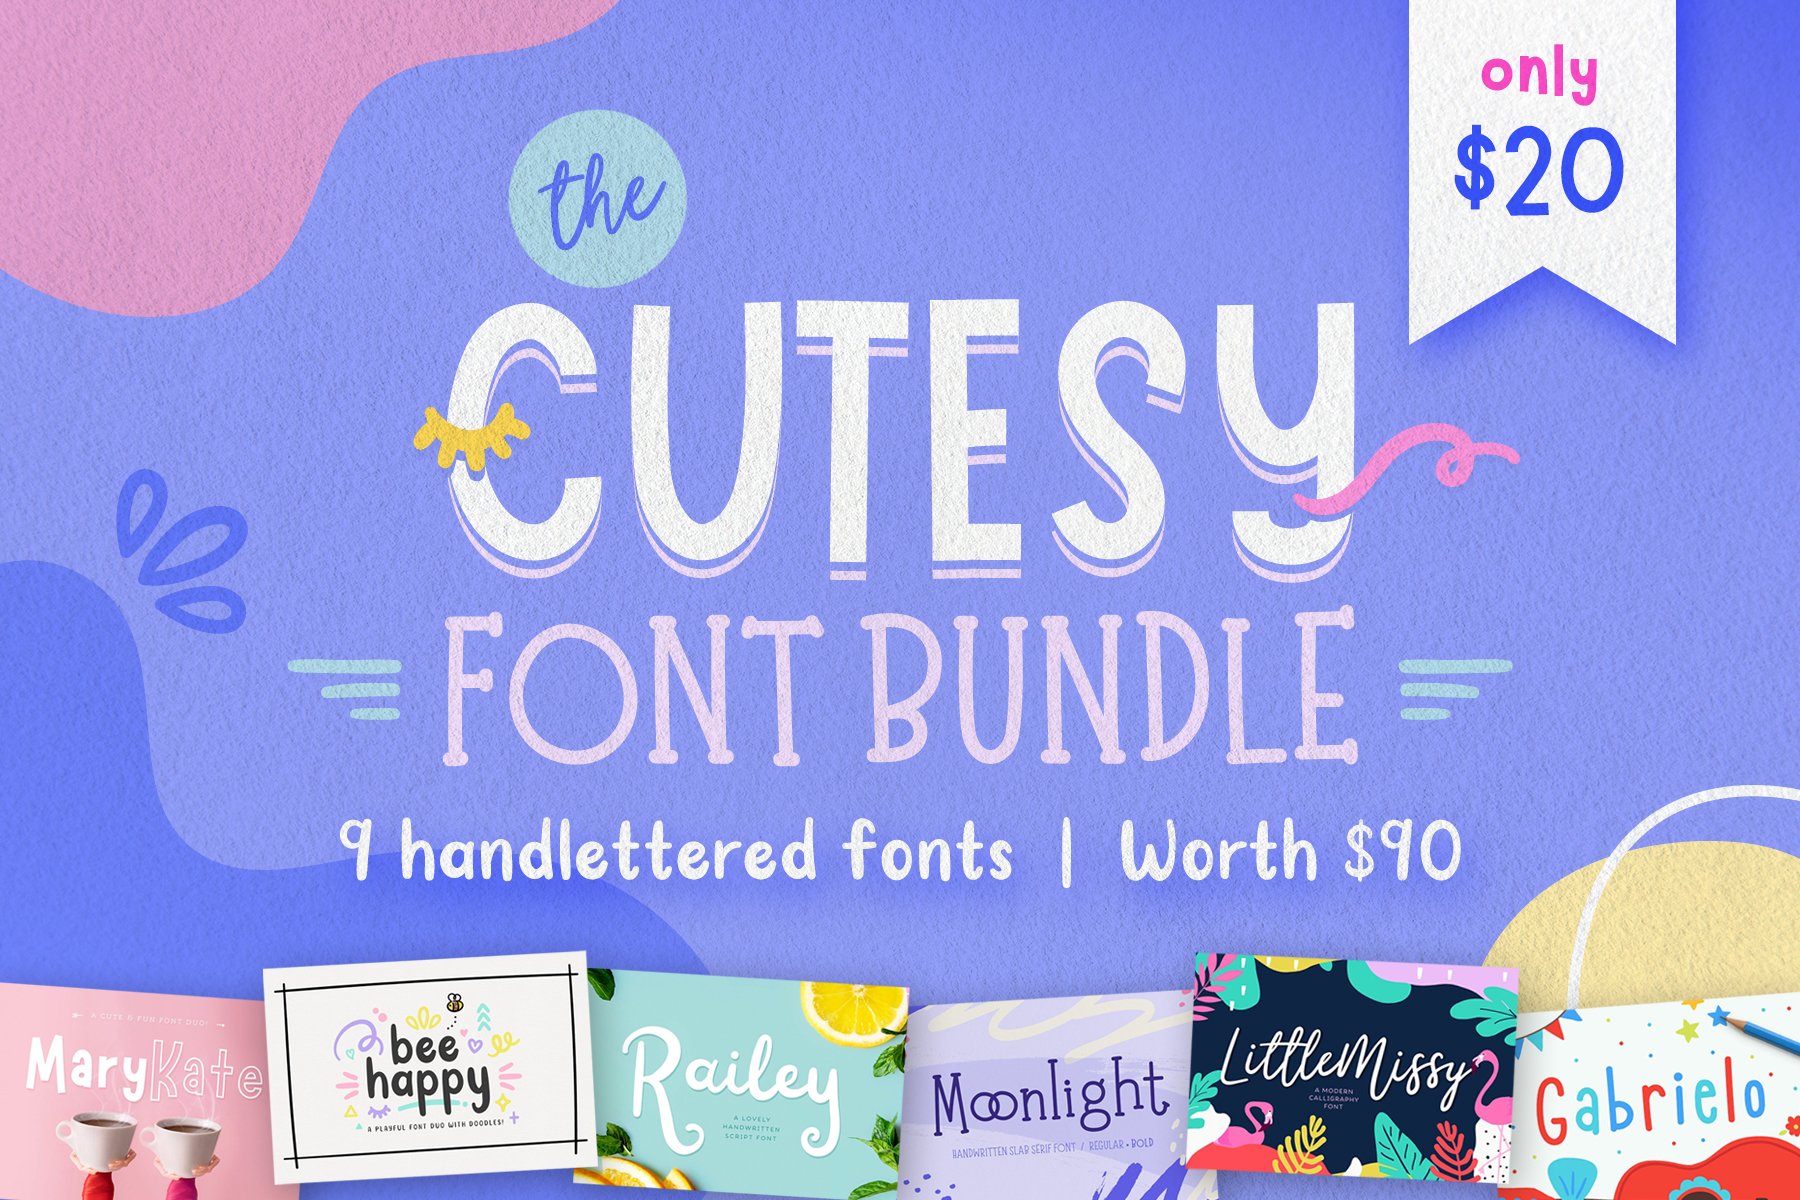 The Cutesy Font Bundle • 9 Fonts! cover image.